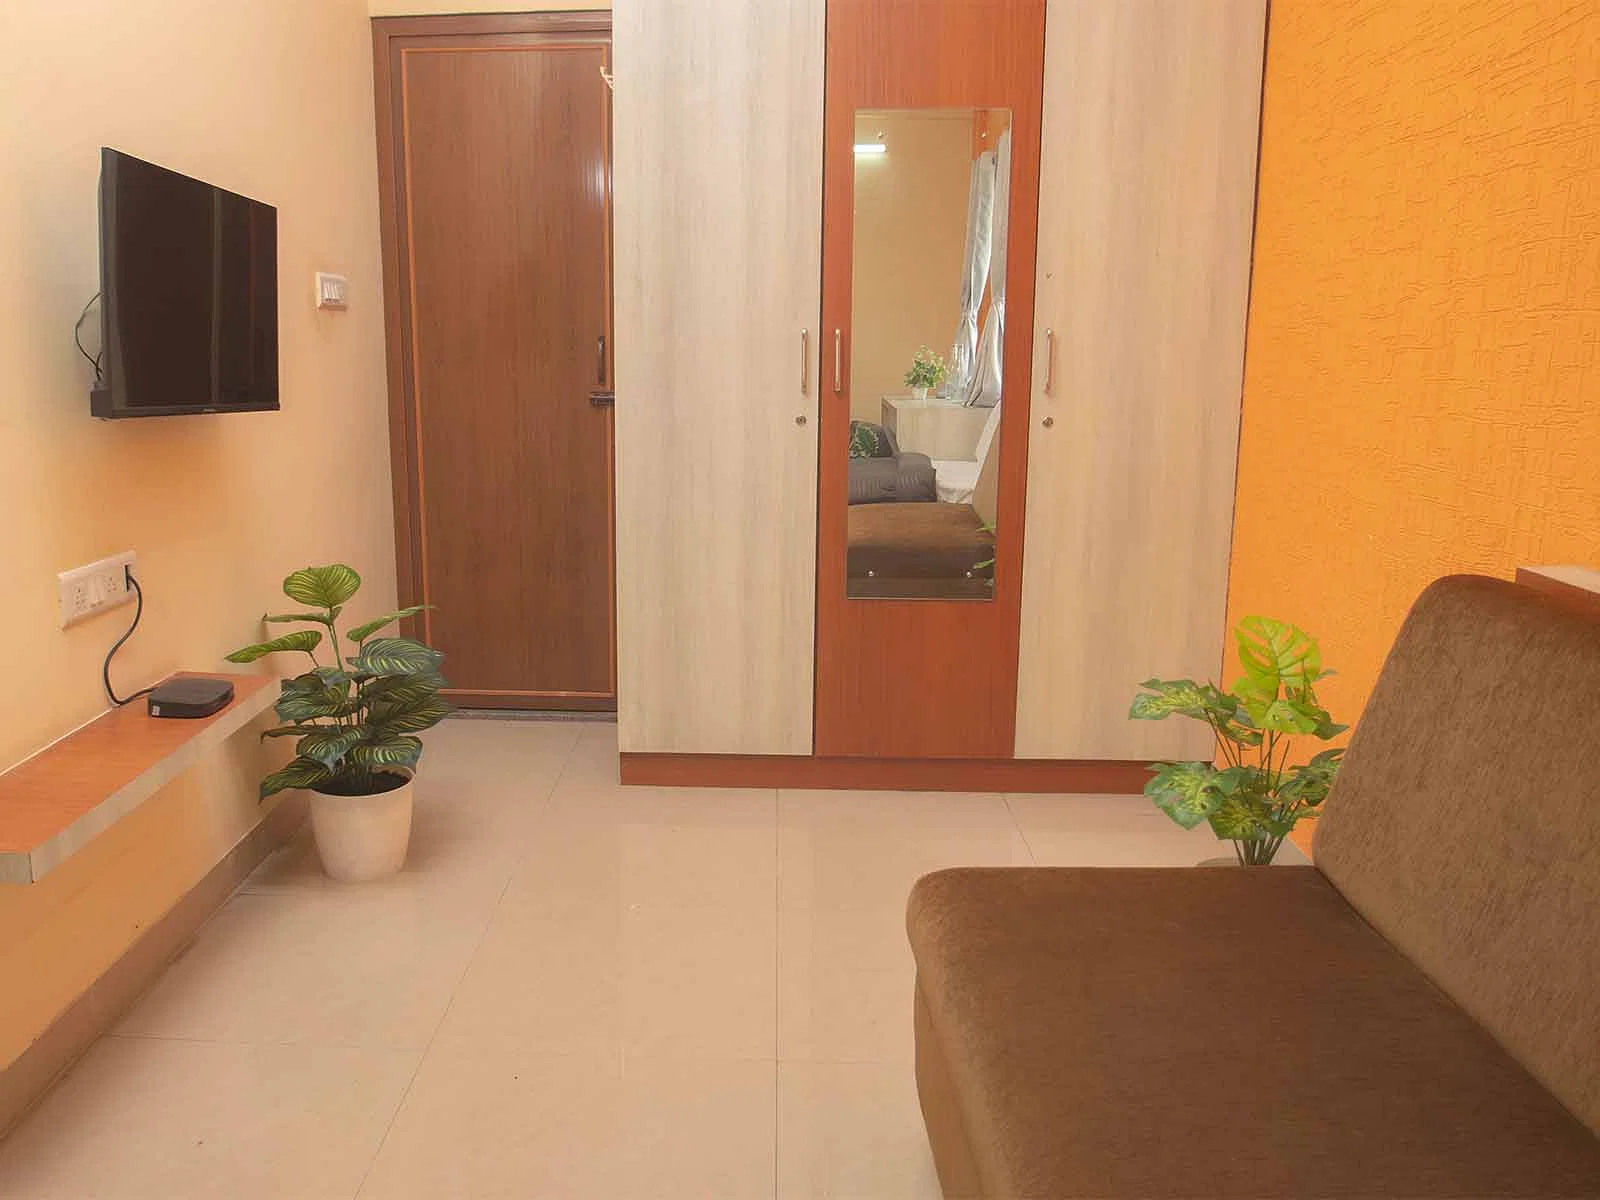 luxury pg rooms for working professionals boys and girls with private bathrooms in Bangalore-Zolo Heaven C